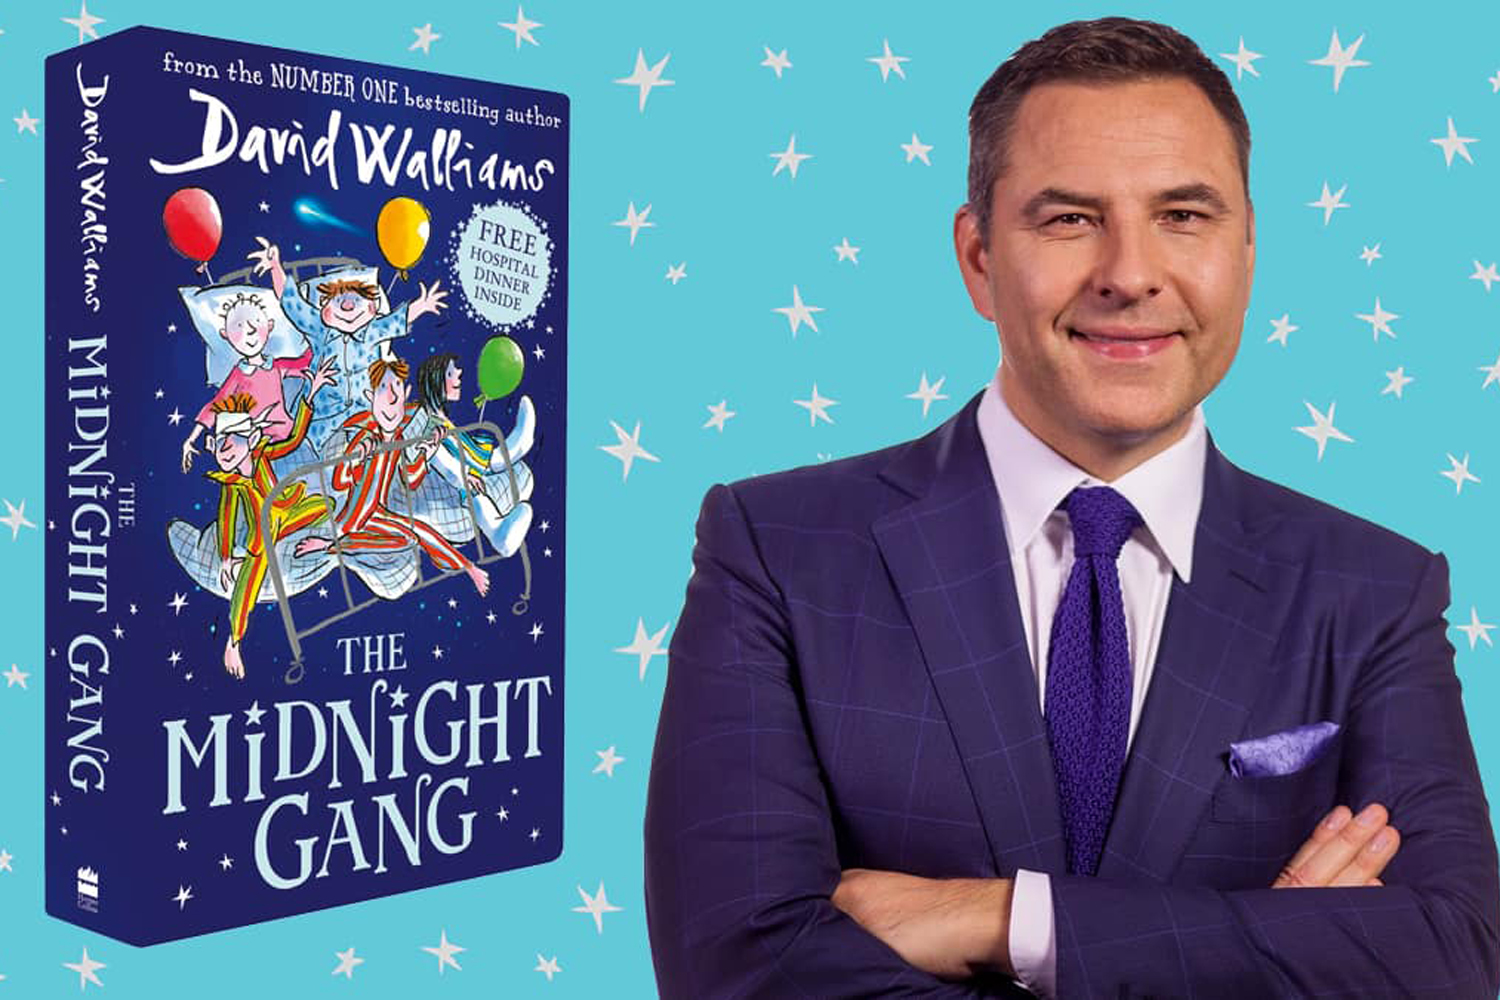 TV star and author David Walliams will be reading his stories to kids